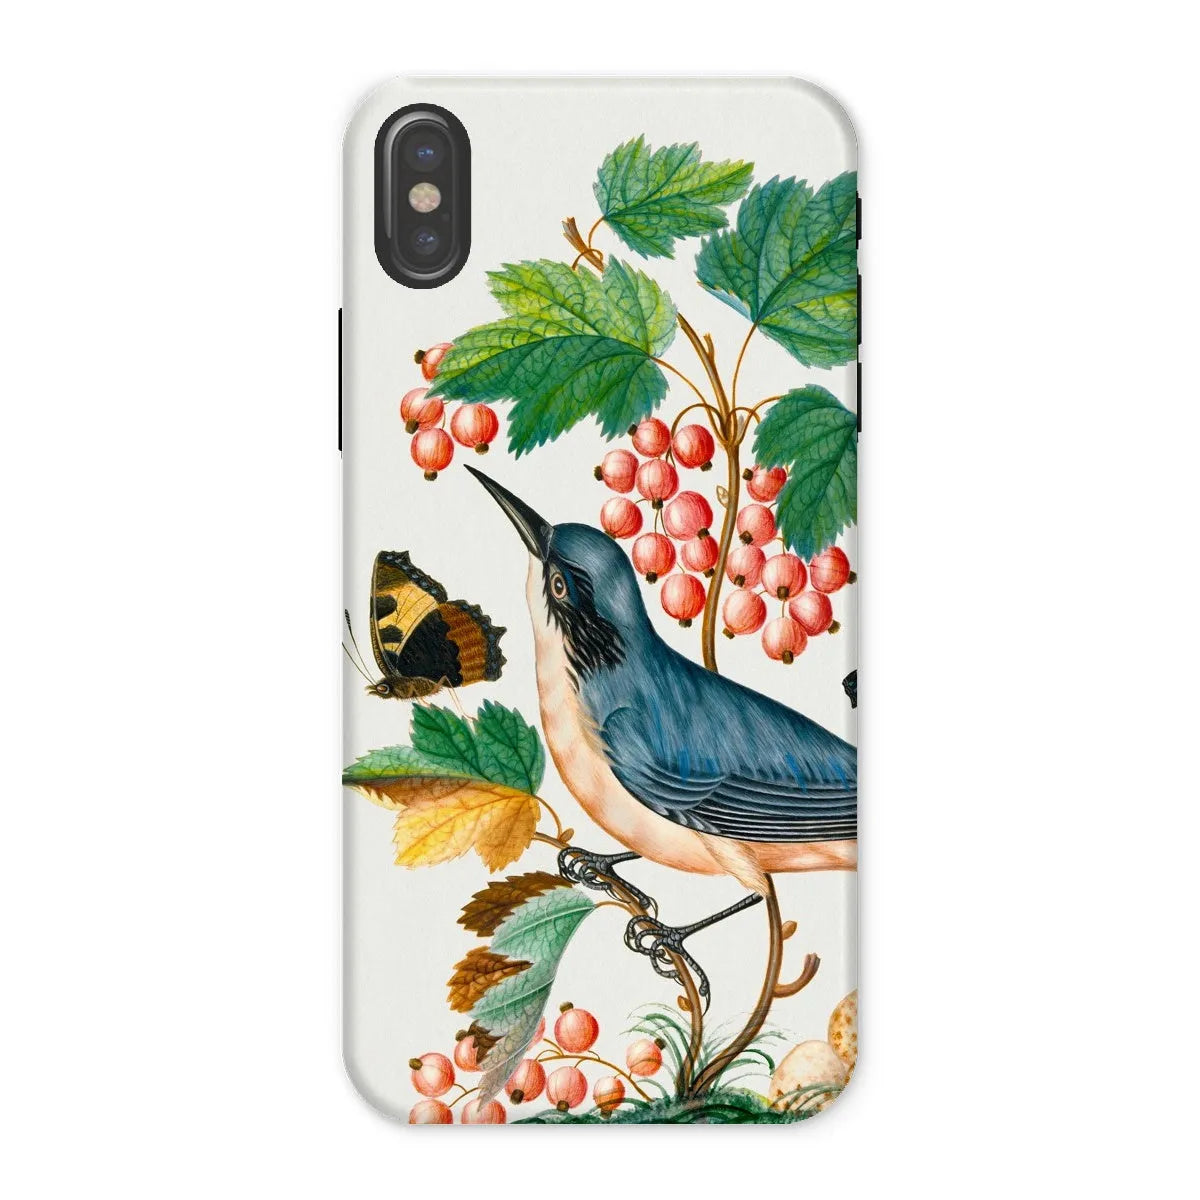 Warbler Admiral Wasps & Ants - Art Phone Case - James Bolton - Iphone x / Matte - Mobile Phone Cases - Aesthetic Art